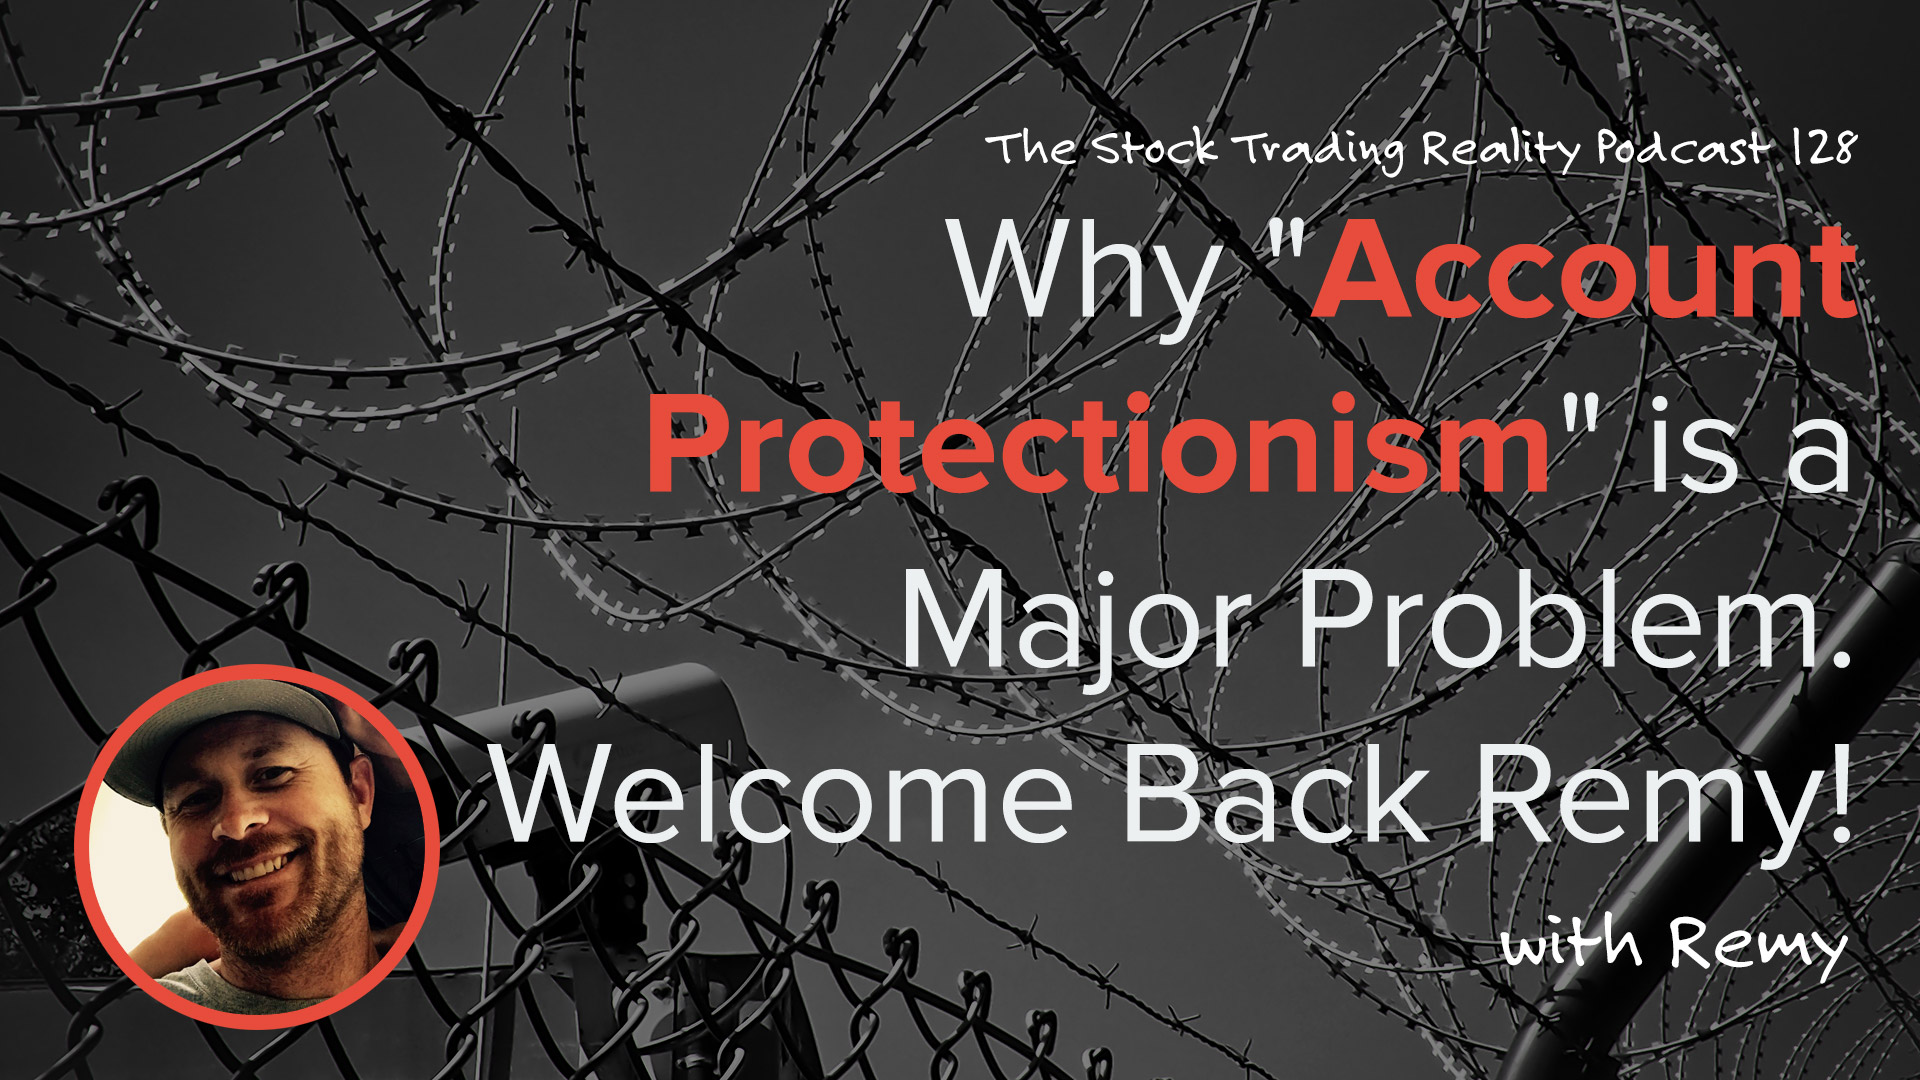 STR 128: Why "Account Protectionism" is a Major Problem. Welcome Back Remy!